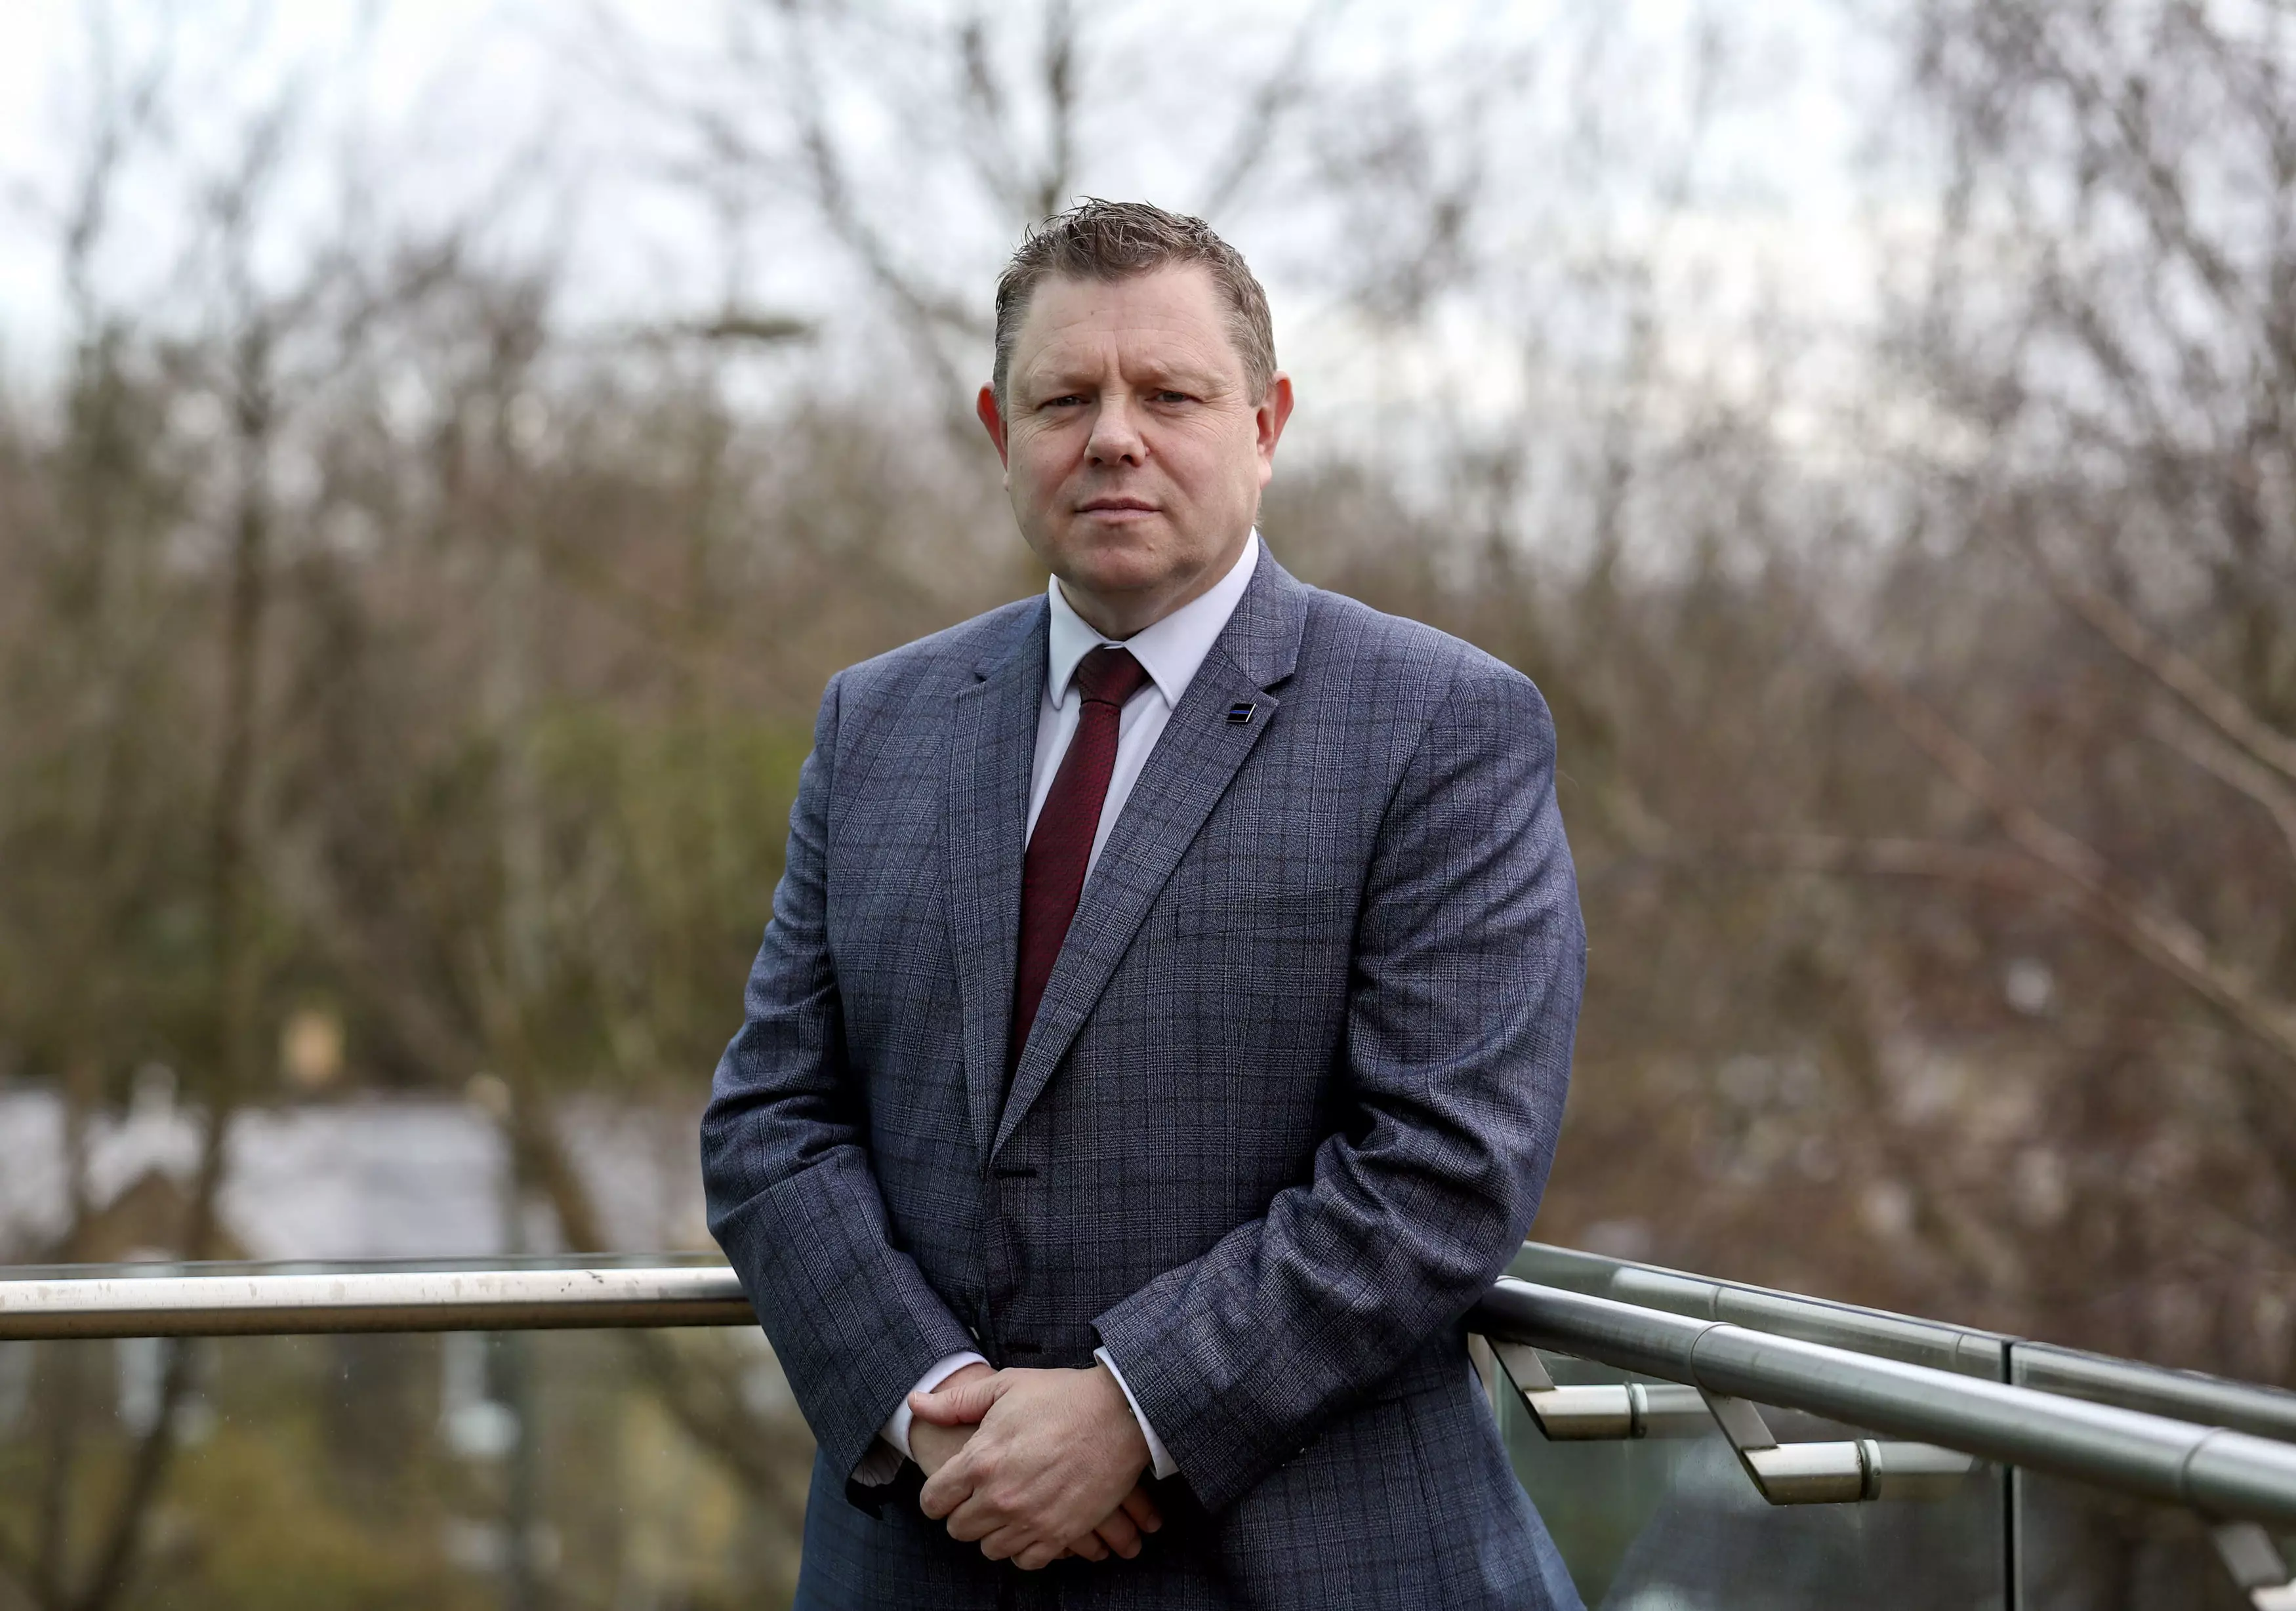 Police Federation chairman John Apter has warned that drunk people can't social distance.